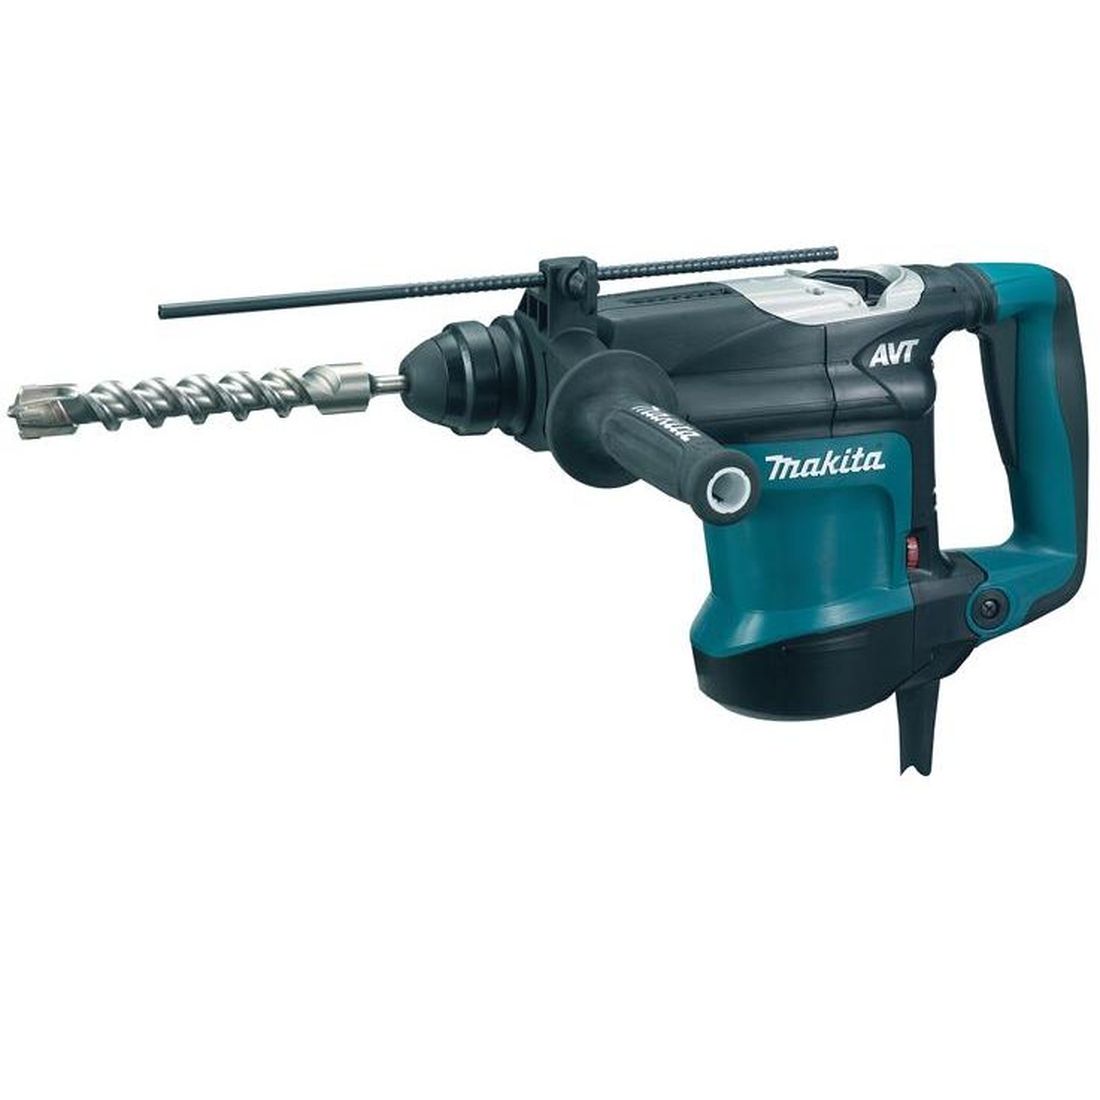 Makita HR3210FCT SDS Plus Rotary Hammer Drill with QC Chuck 850W 240V                  